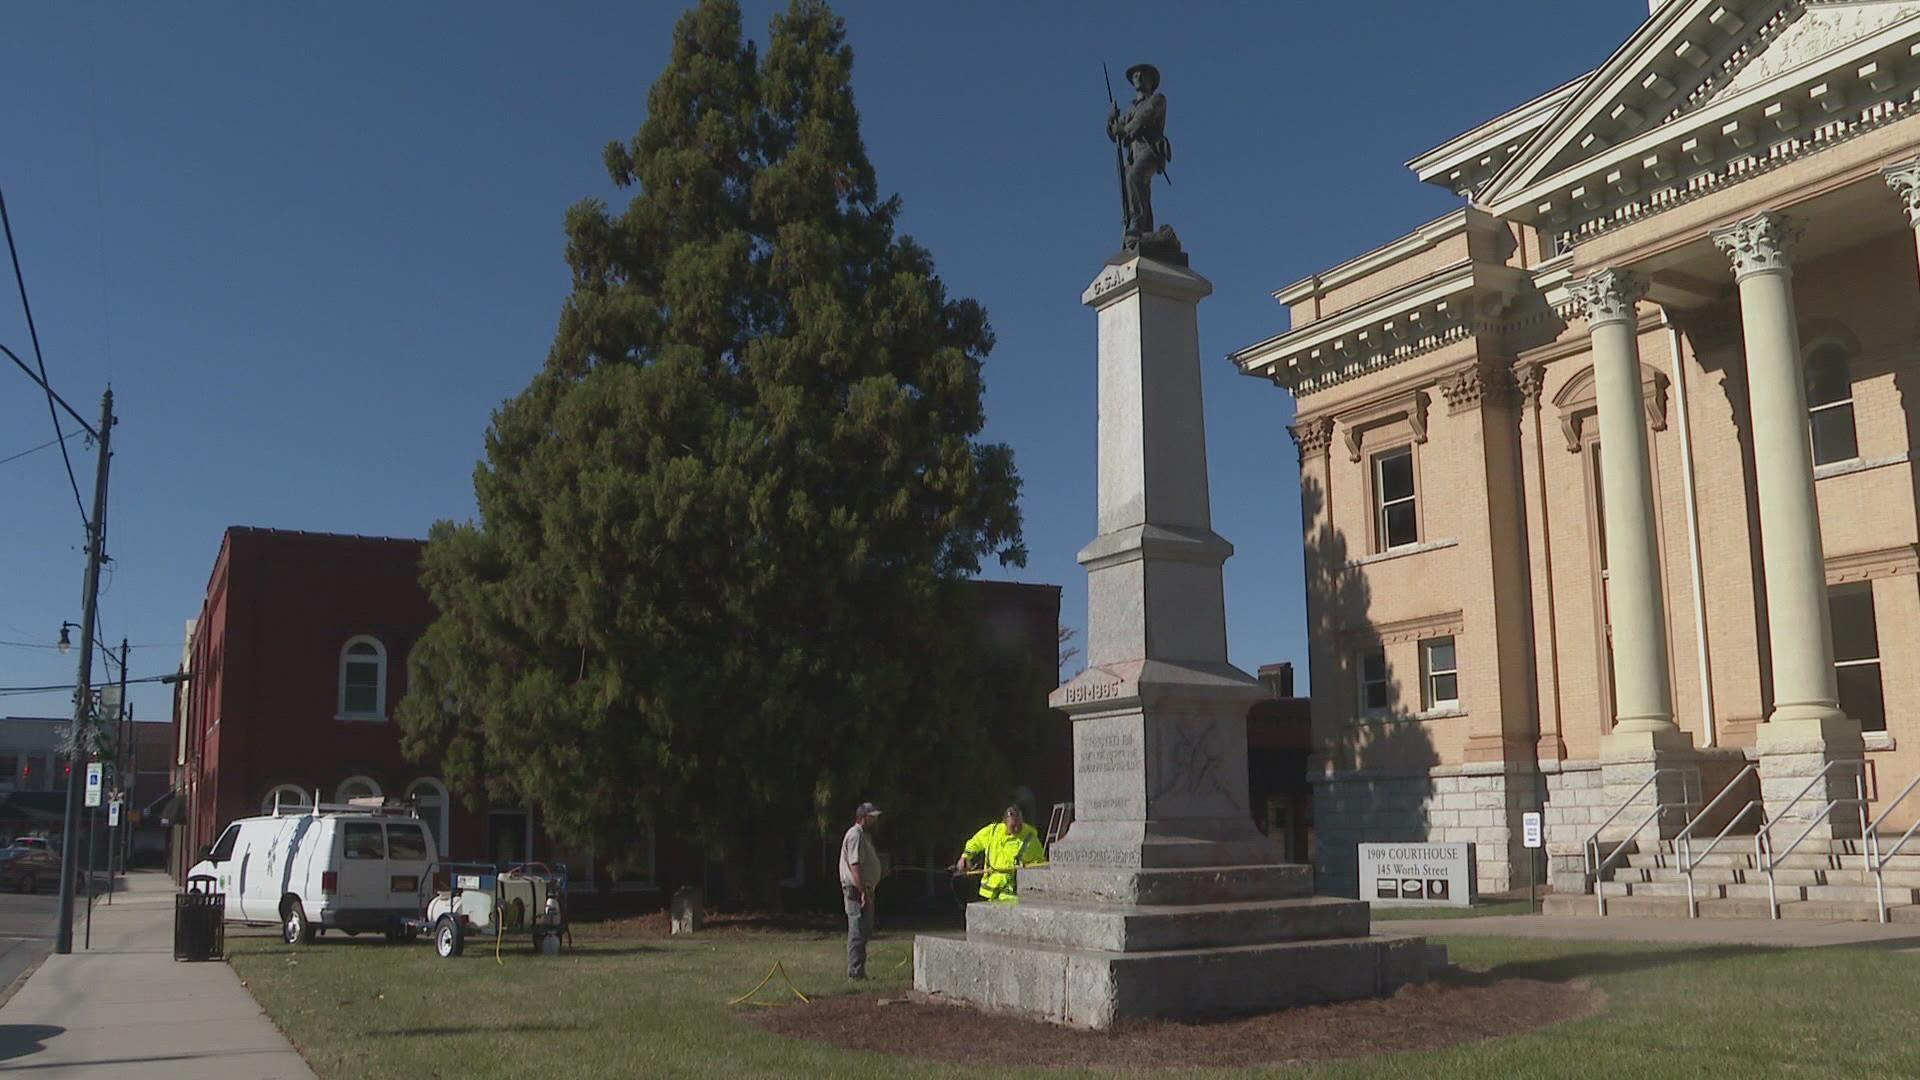 Asheboro police said someone spray-painted "derogatory" words on the statue outside of the Historic Randolph County Courthouse. It was cleaned shortly after.